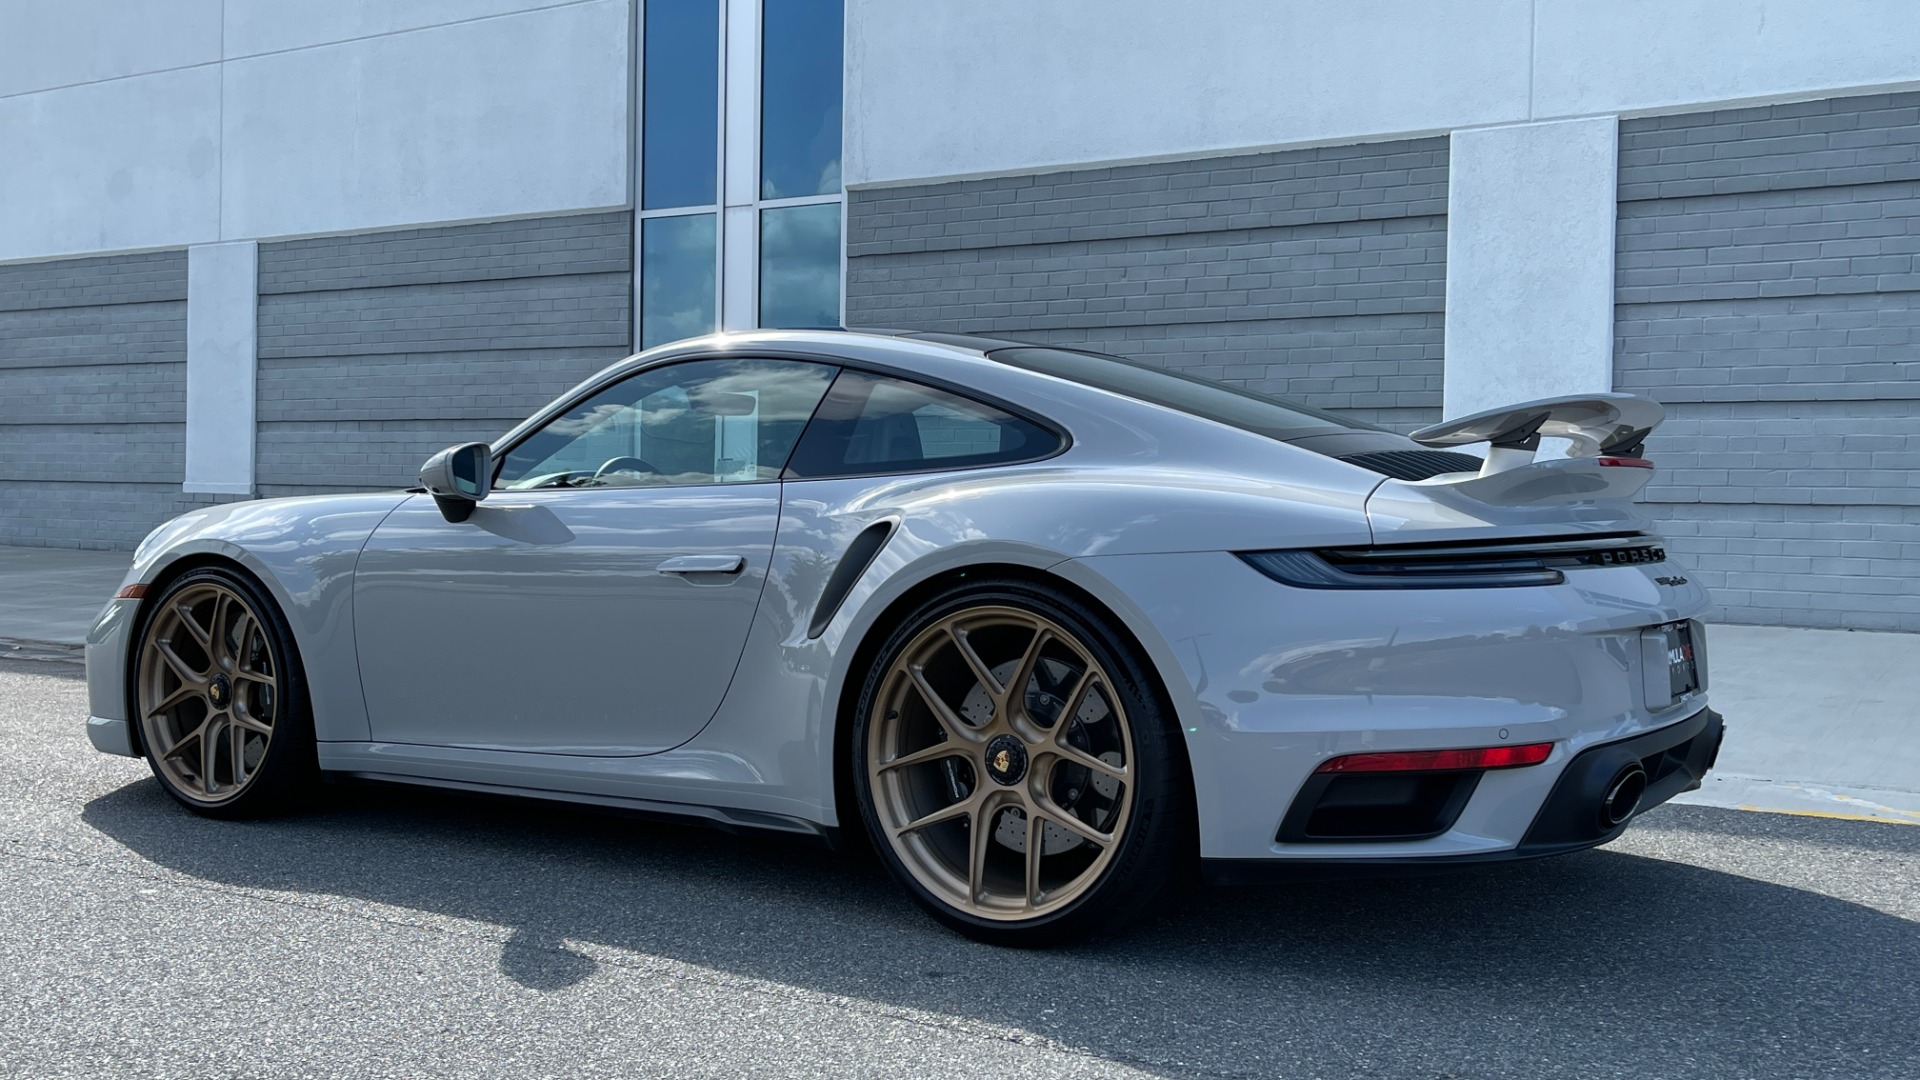 Used 2021 Porsche 911 Turbo S / HRE WHEELS / FRONT LIFT / MATRIX LIGHTS / PASM SUSPENSION for sale $279,000 at Formula Imports in Charlotte NC 28227 10